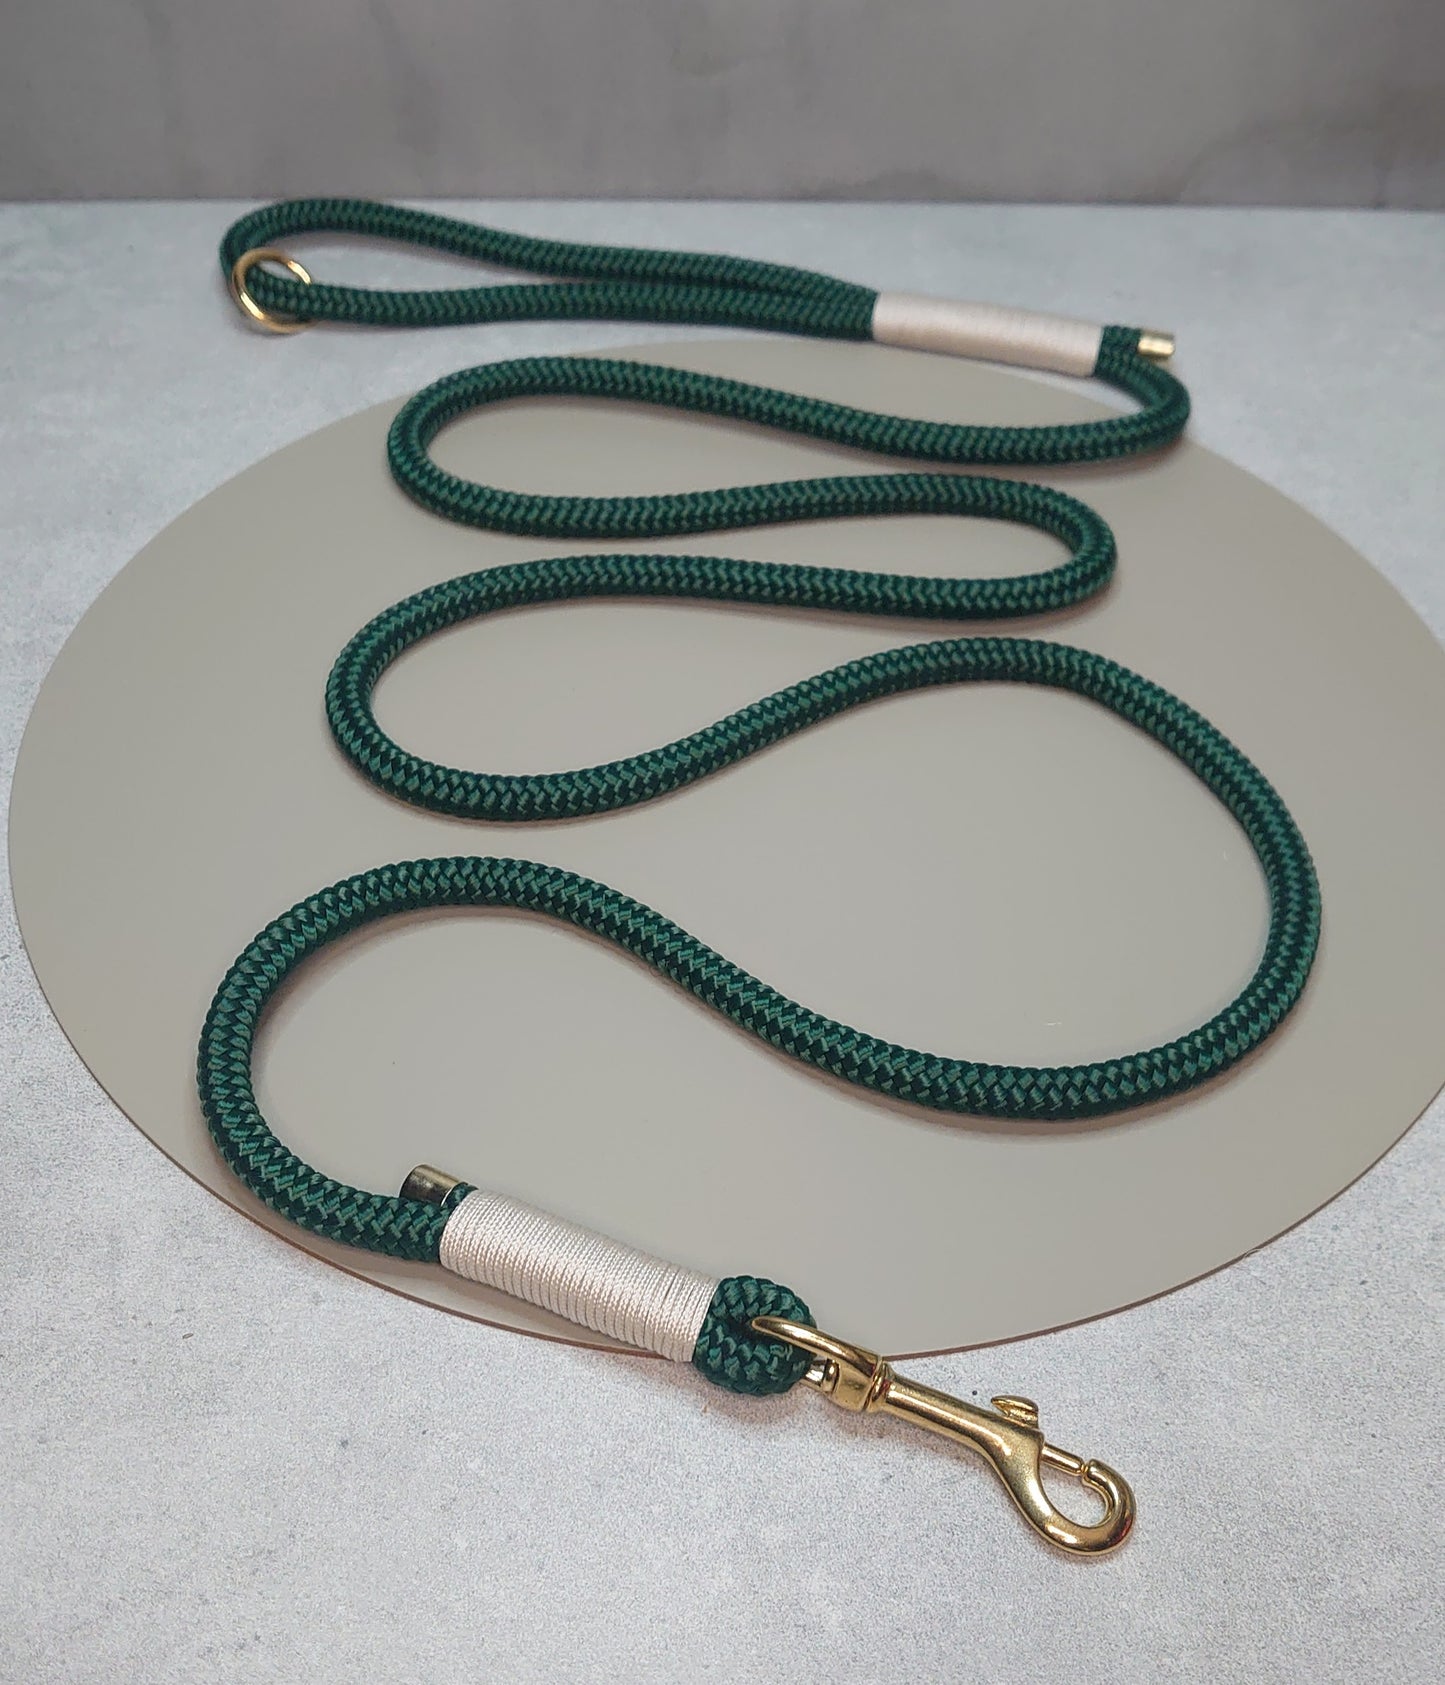 Rope lead - Design your own